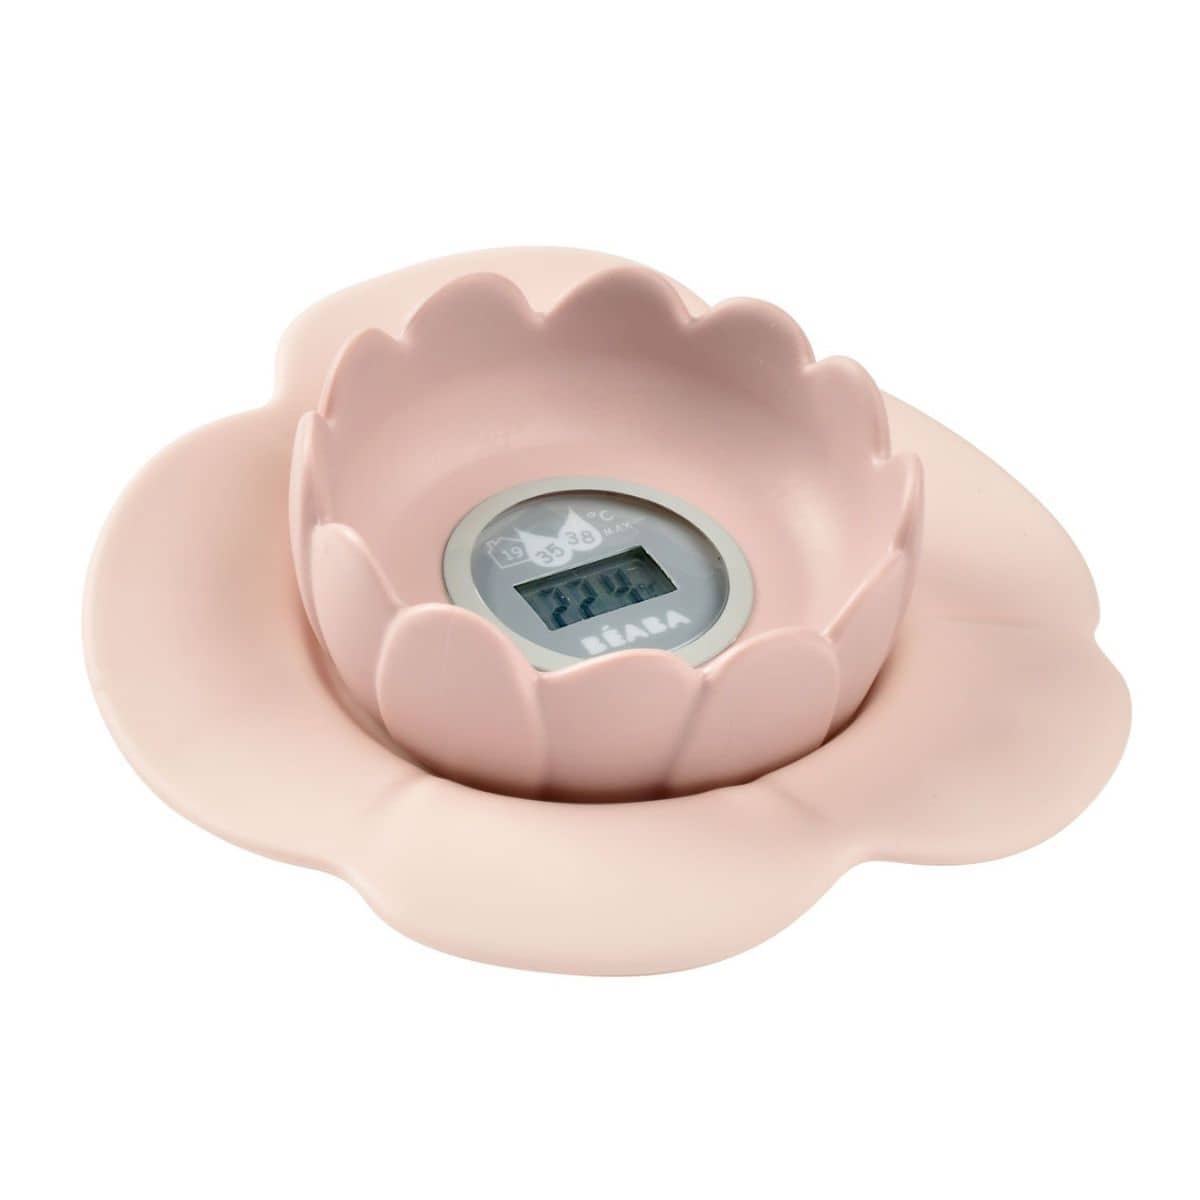 Beaba Lotus Digital Bath and Room Thermometer - Old Pink